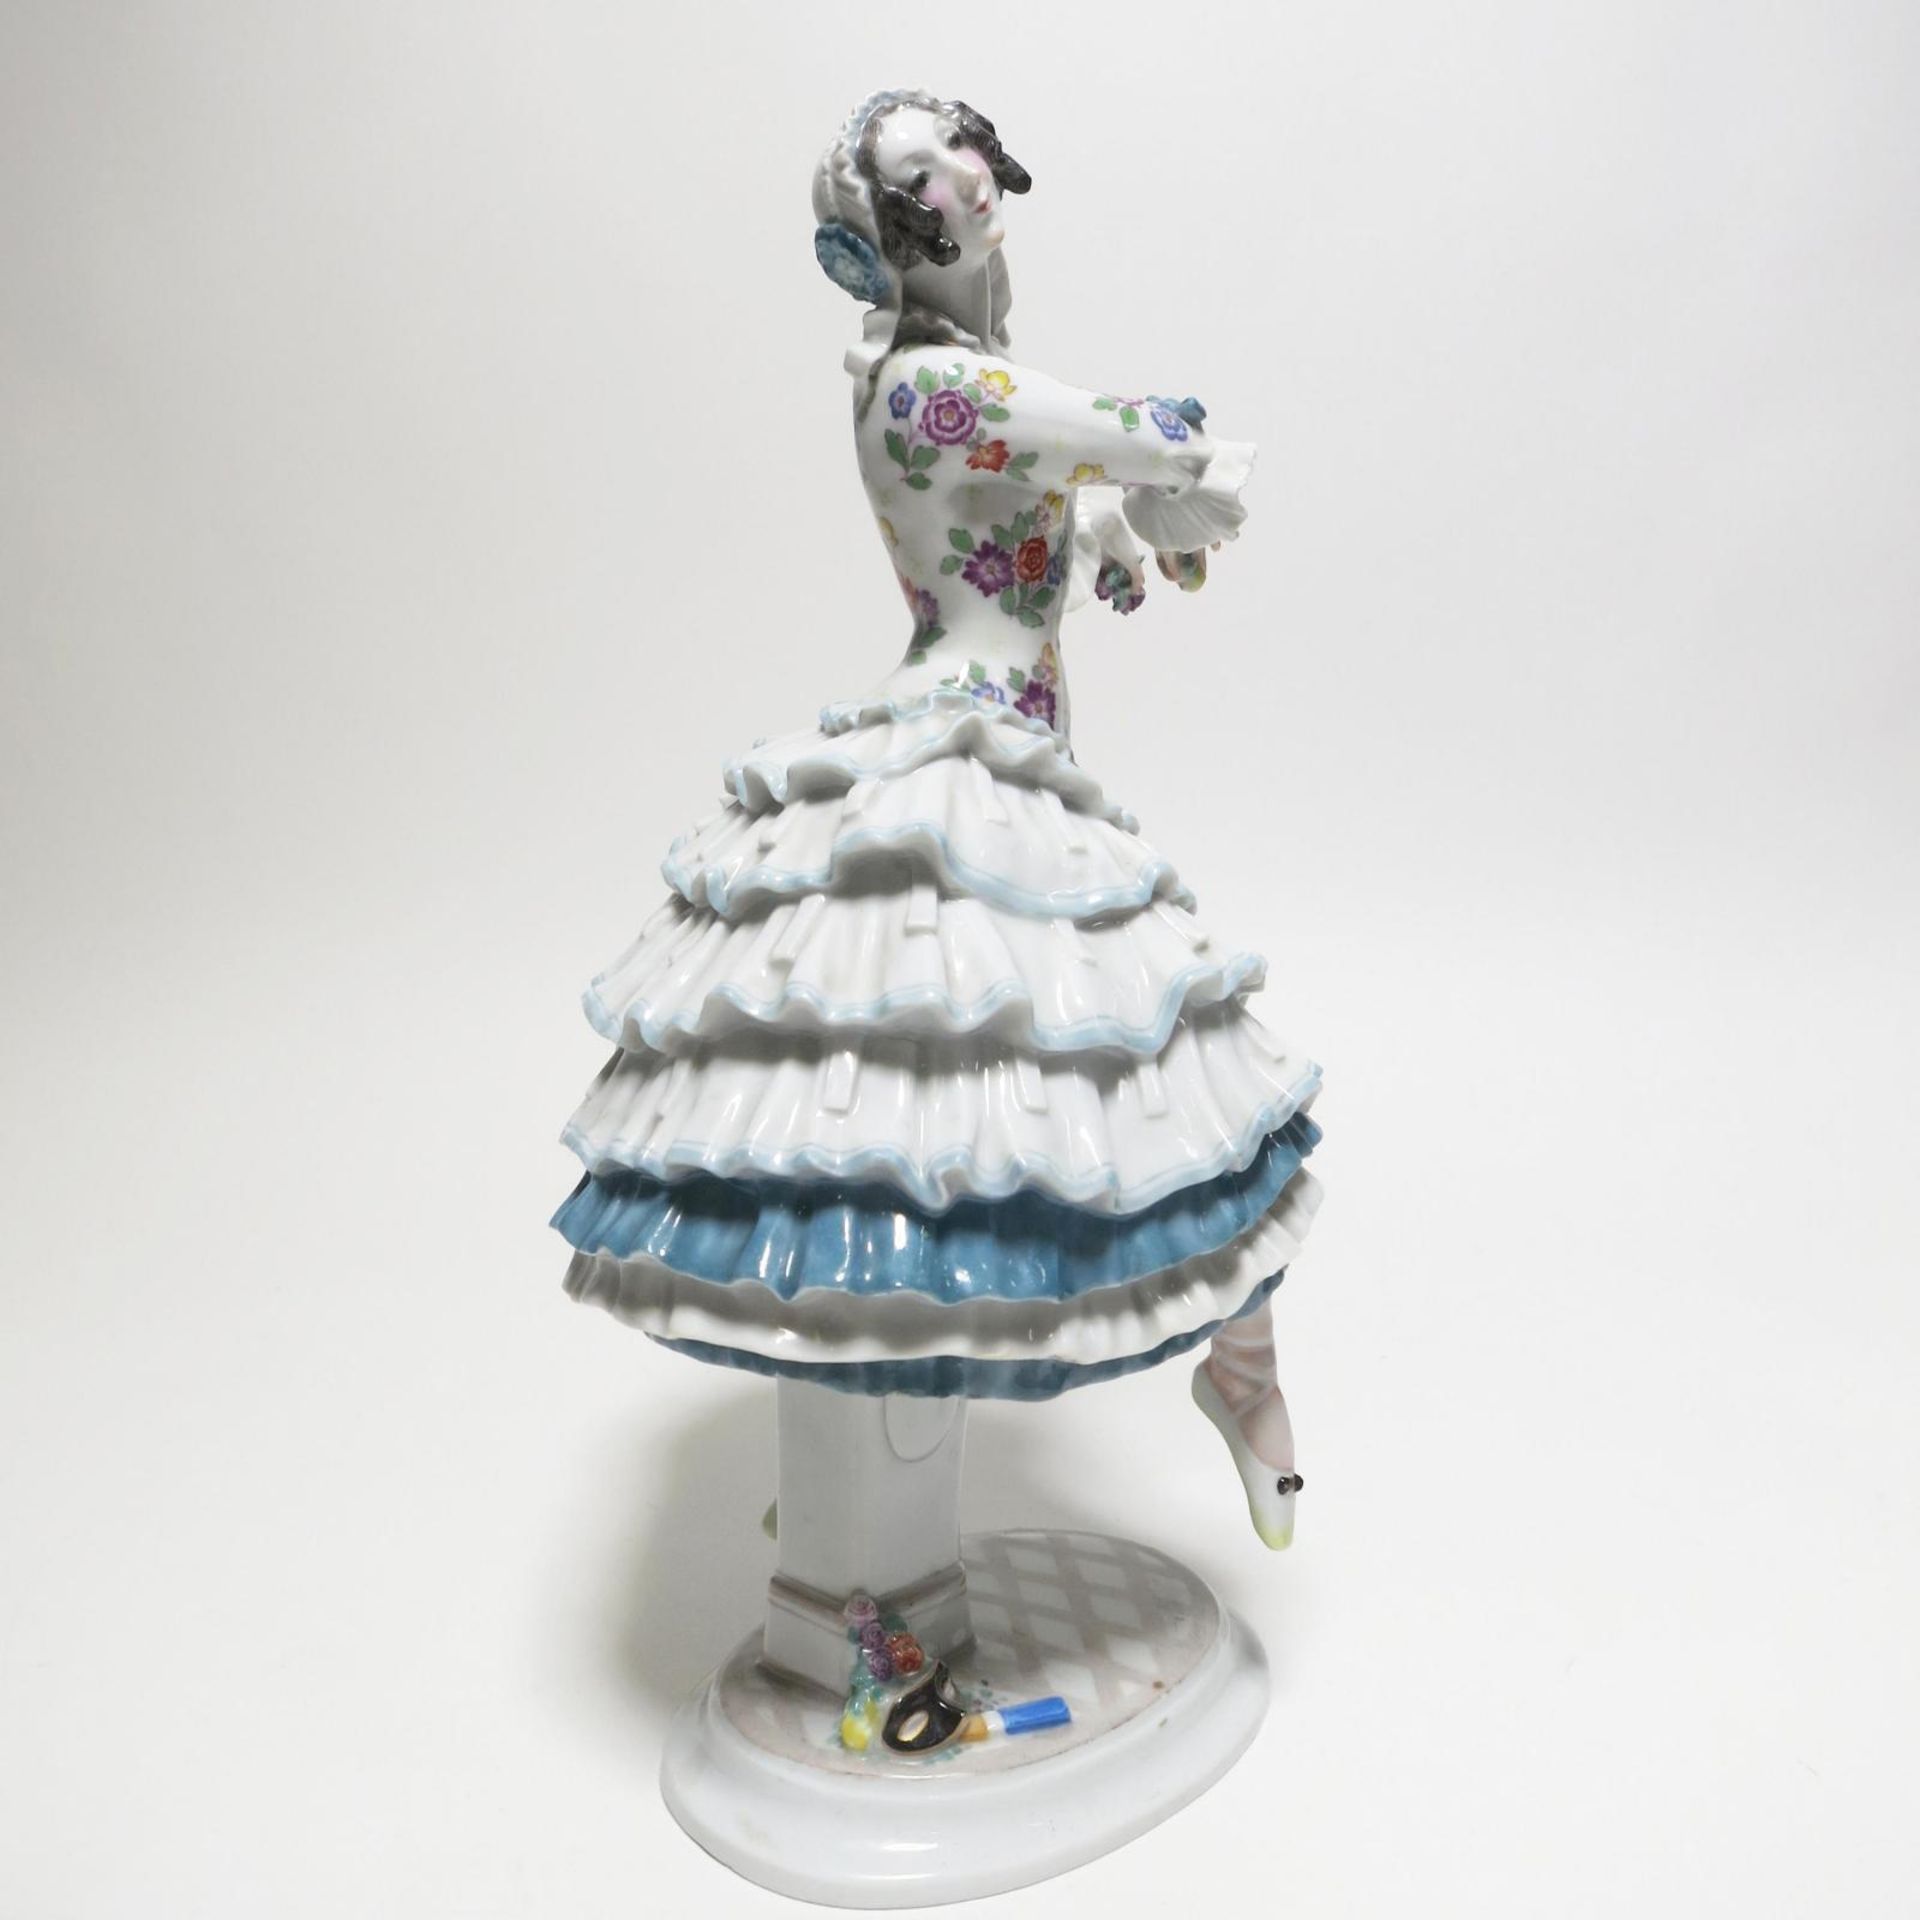 Meissen: PORCELAIN FIGURINES OF THE 'RUSSIAN BALLET' - Image 18 of 49